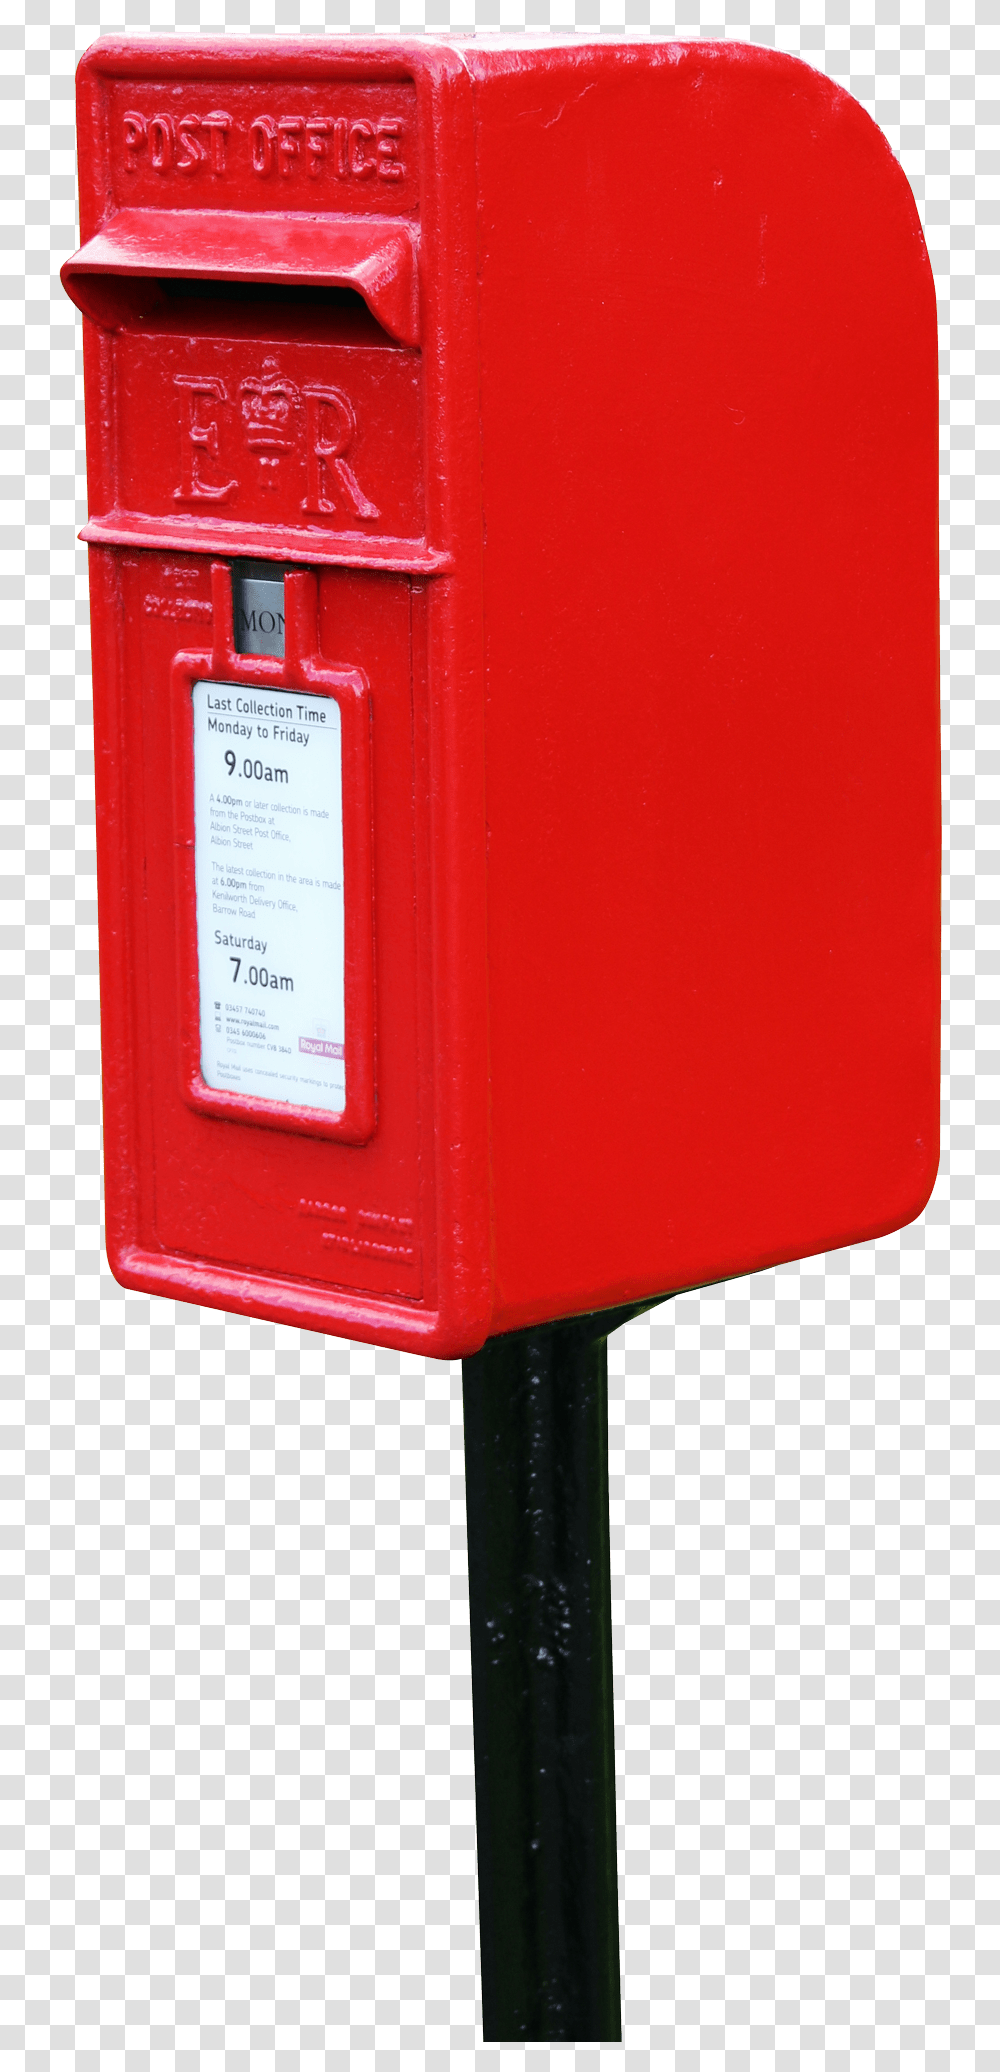 Red Postbox Postbox, Mailbox, Public Mailbox, Letterbox Transparent Png